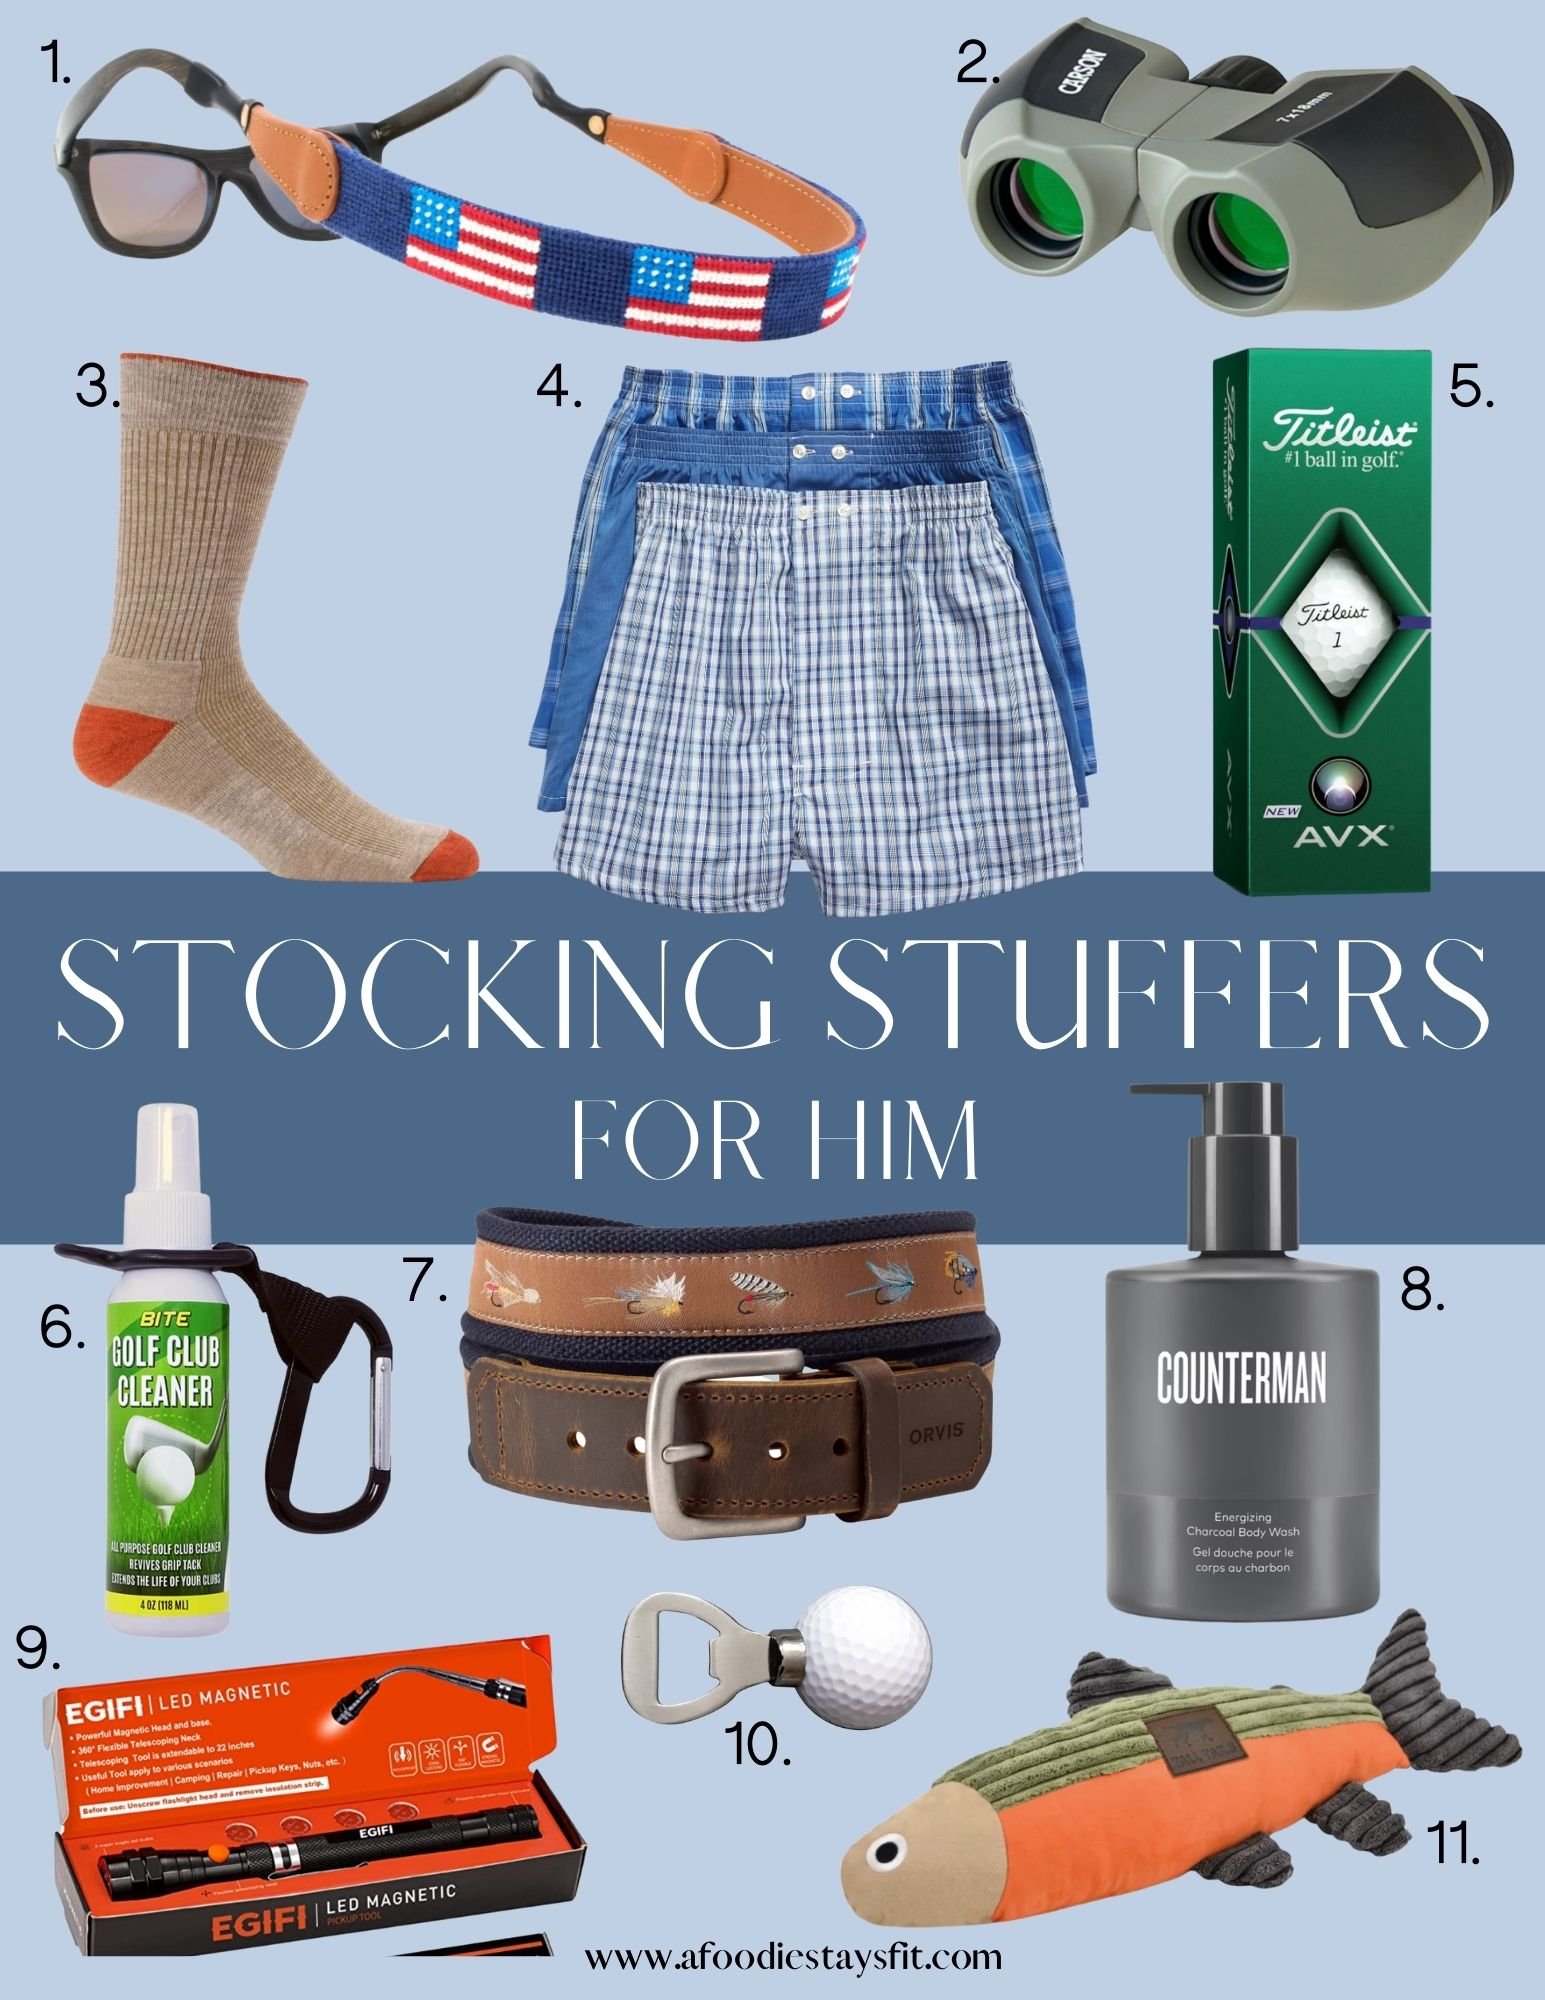 stocking stuffers for him